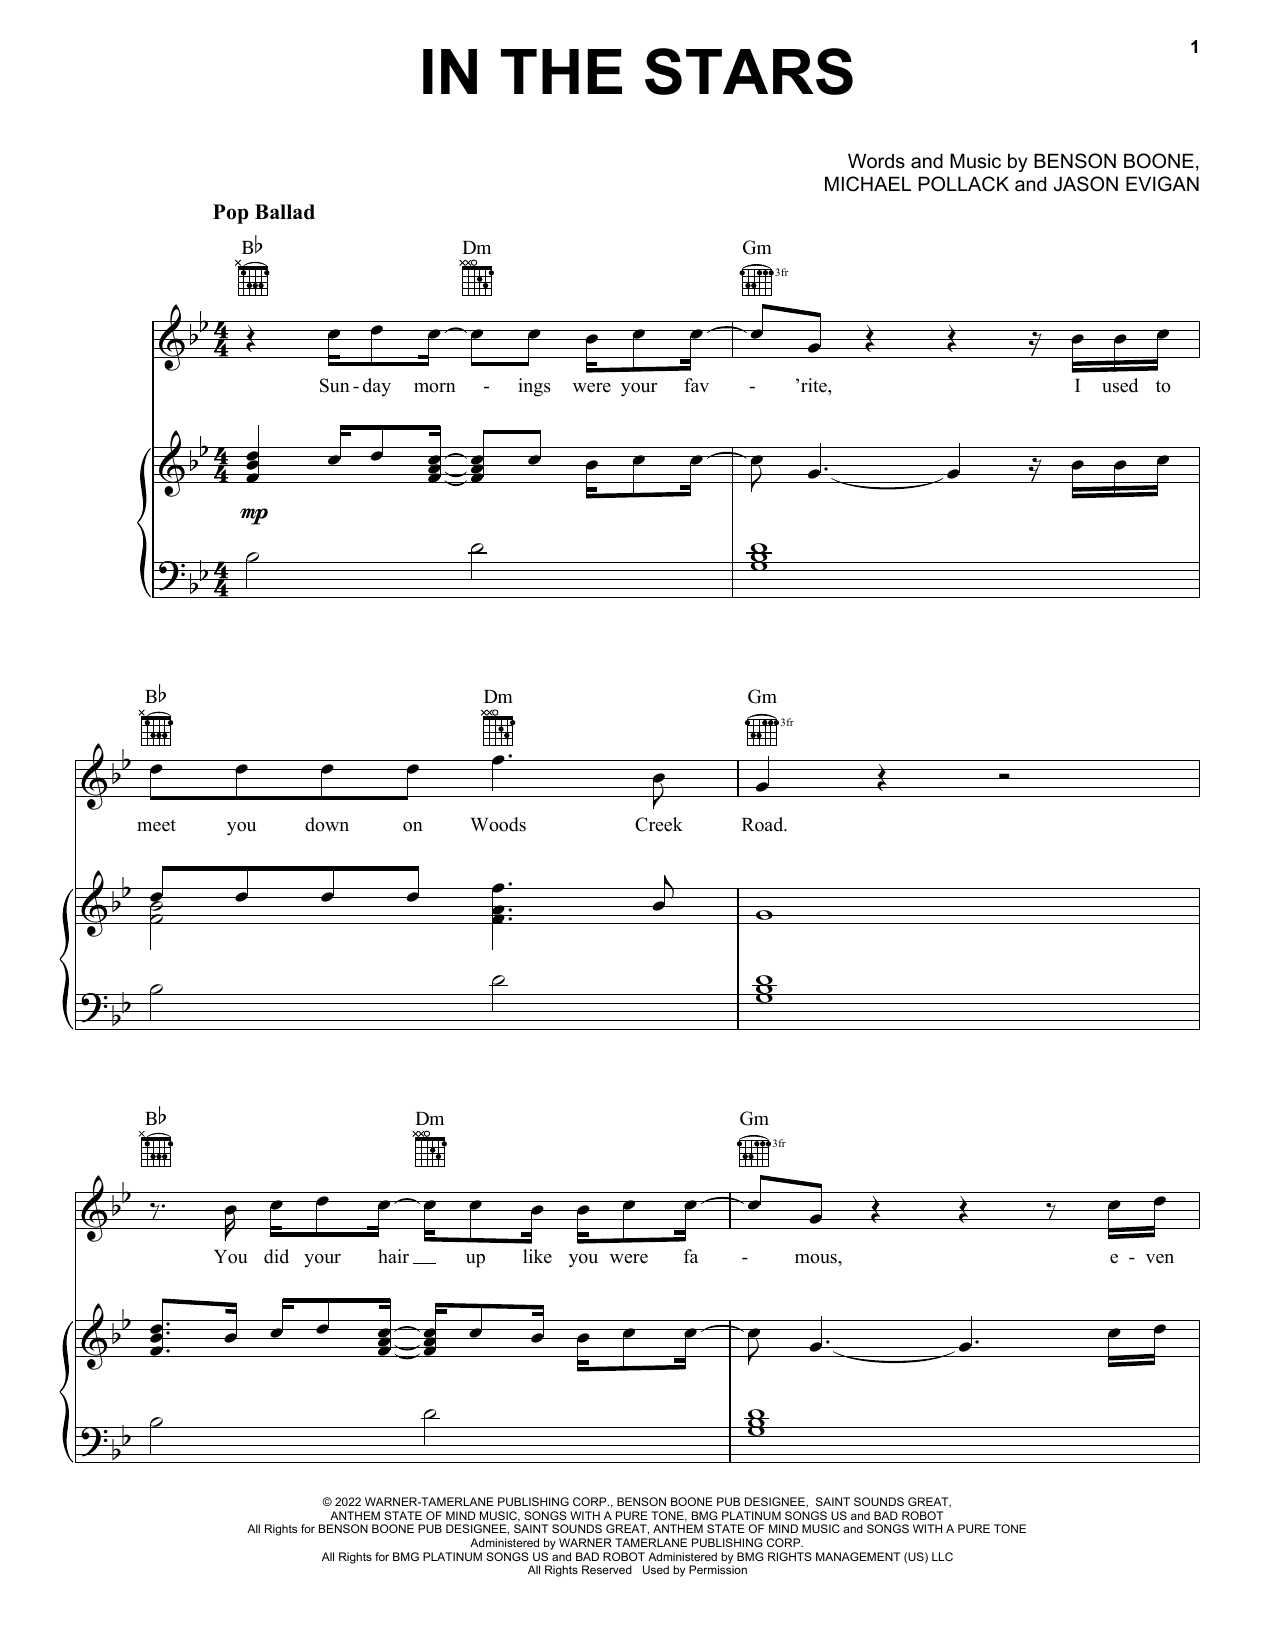 Download Benson Boone In The Stars sheet music and printable PDF score & Pop music notes